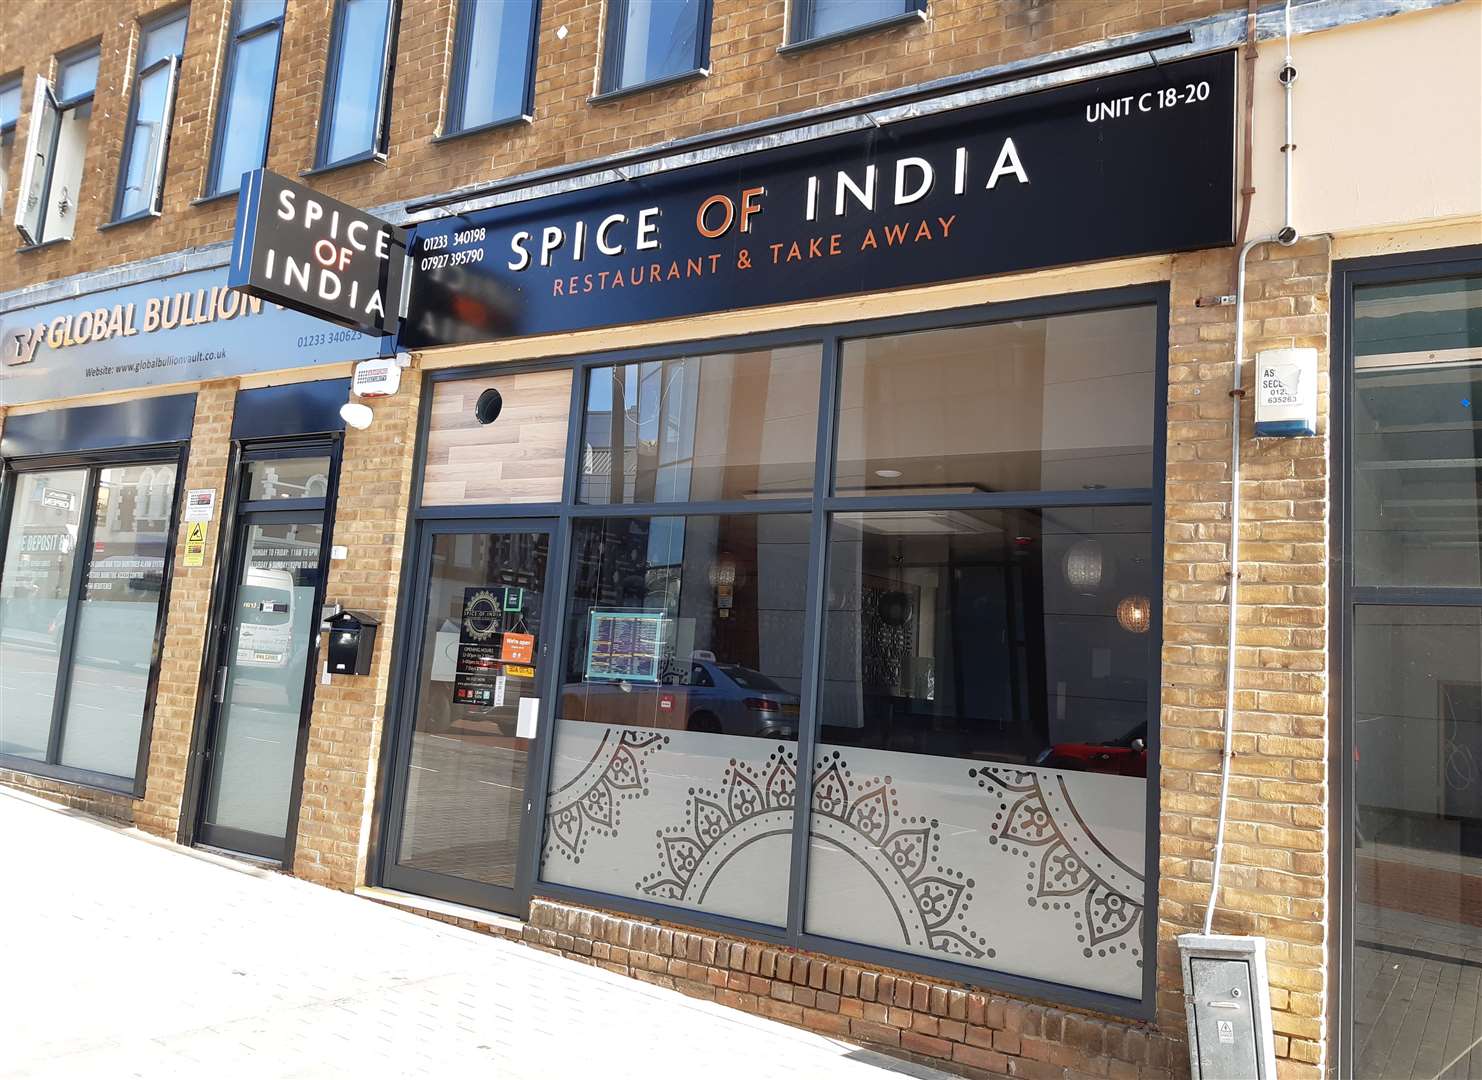 The Spice of India has opened underneath Trafalgar House at the bottom of Bank Street